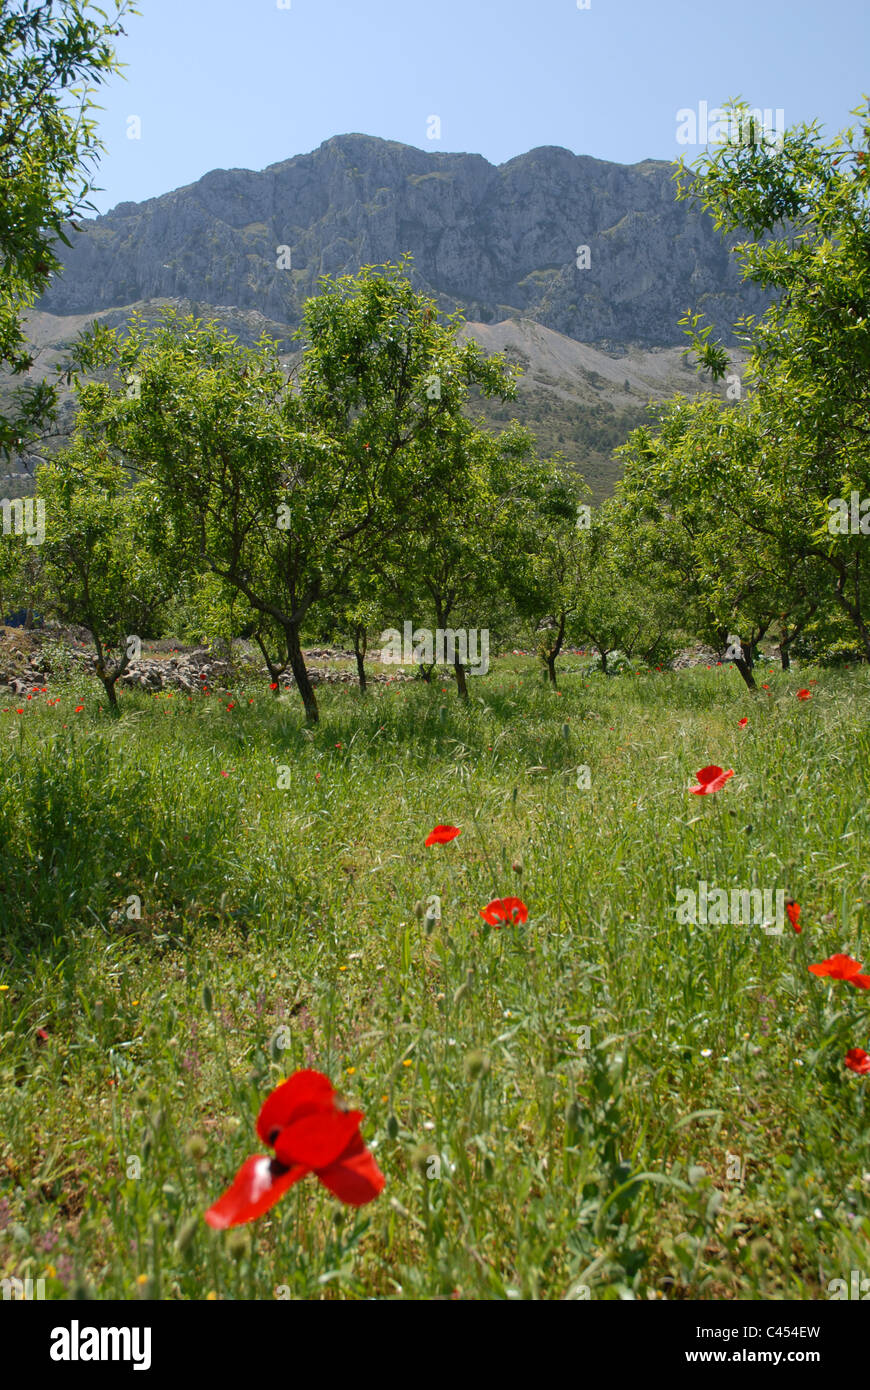 view to mountains with almond orchard and poppies in the foreground, Sierra de Bernia, Alicante Province, Valencia, Spain Stock Photo